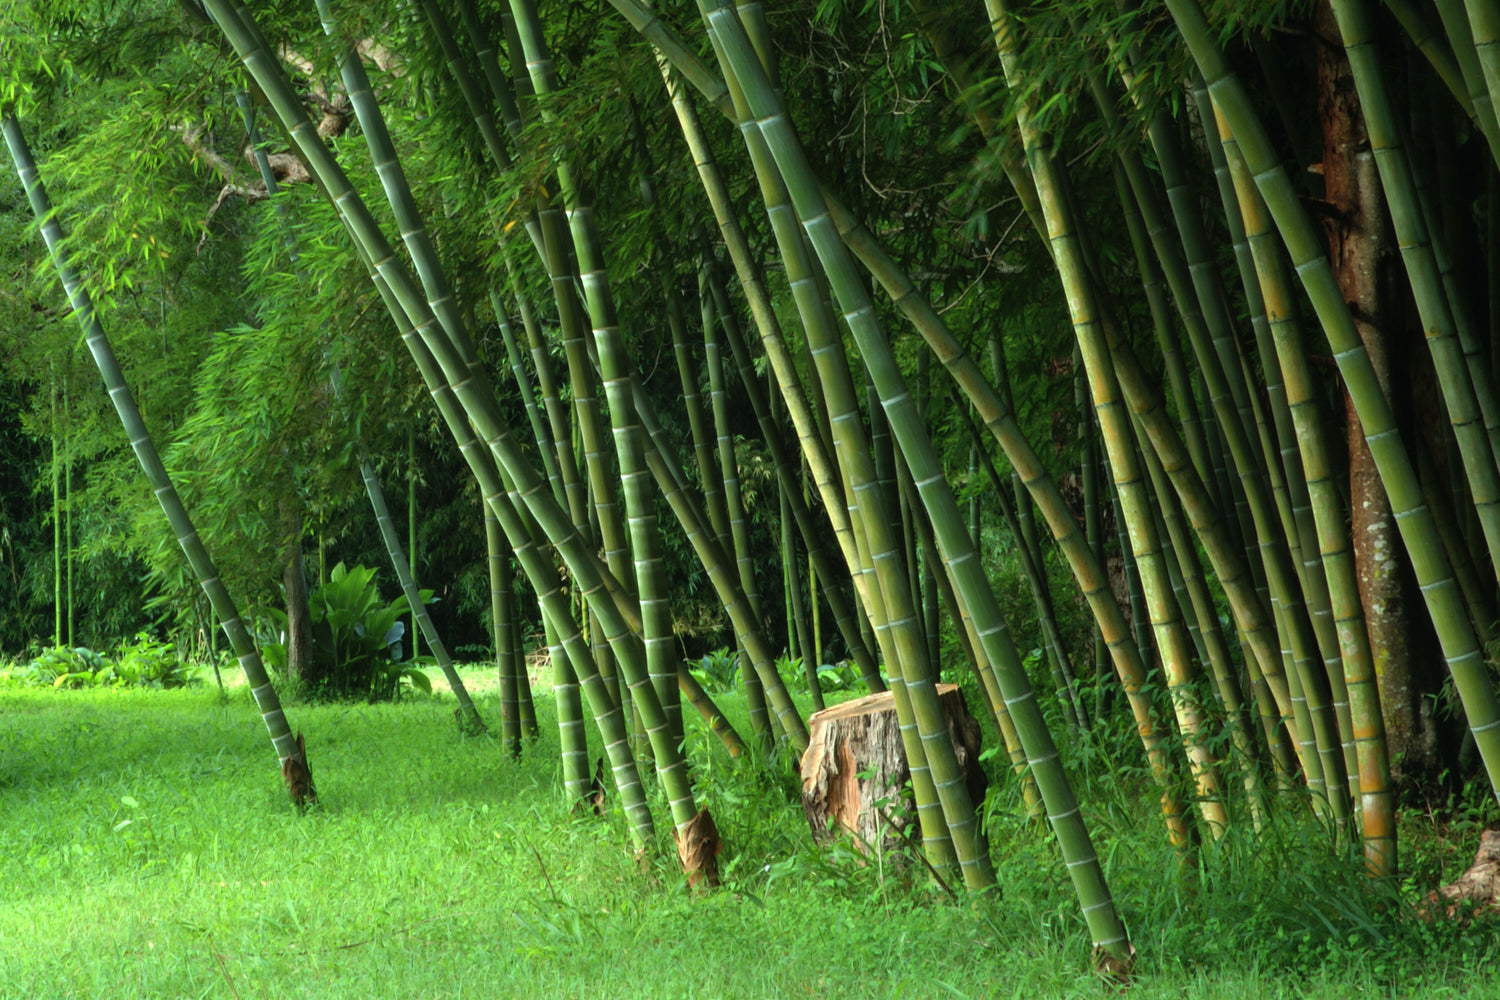 Different Types Of Bamboo: Learn About Bamboo Plants For The Garden